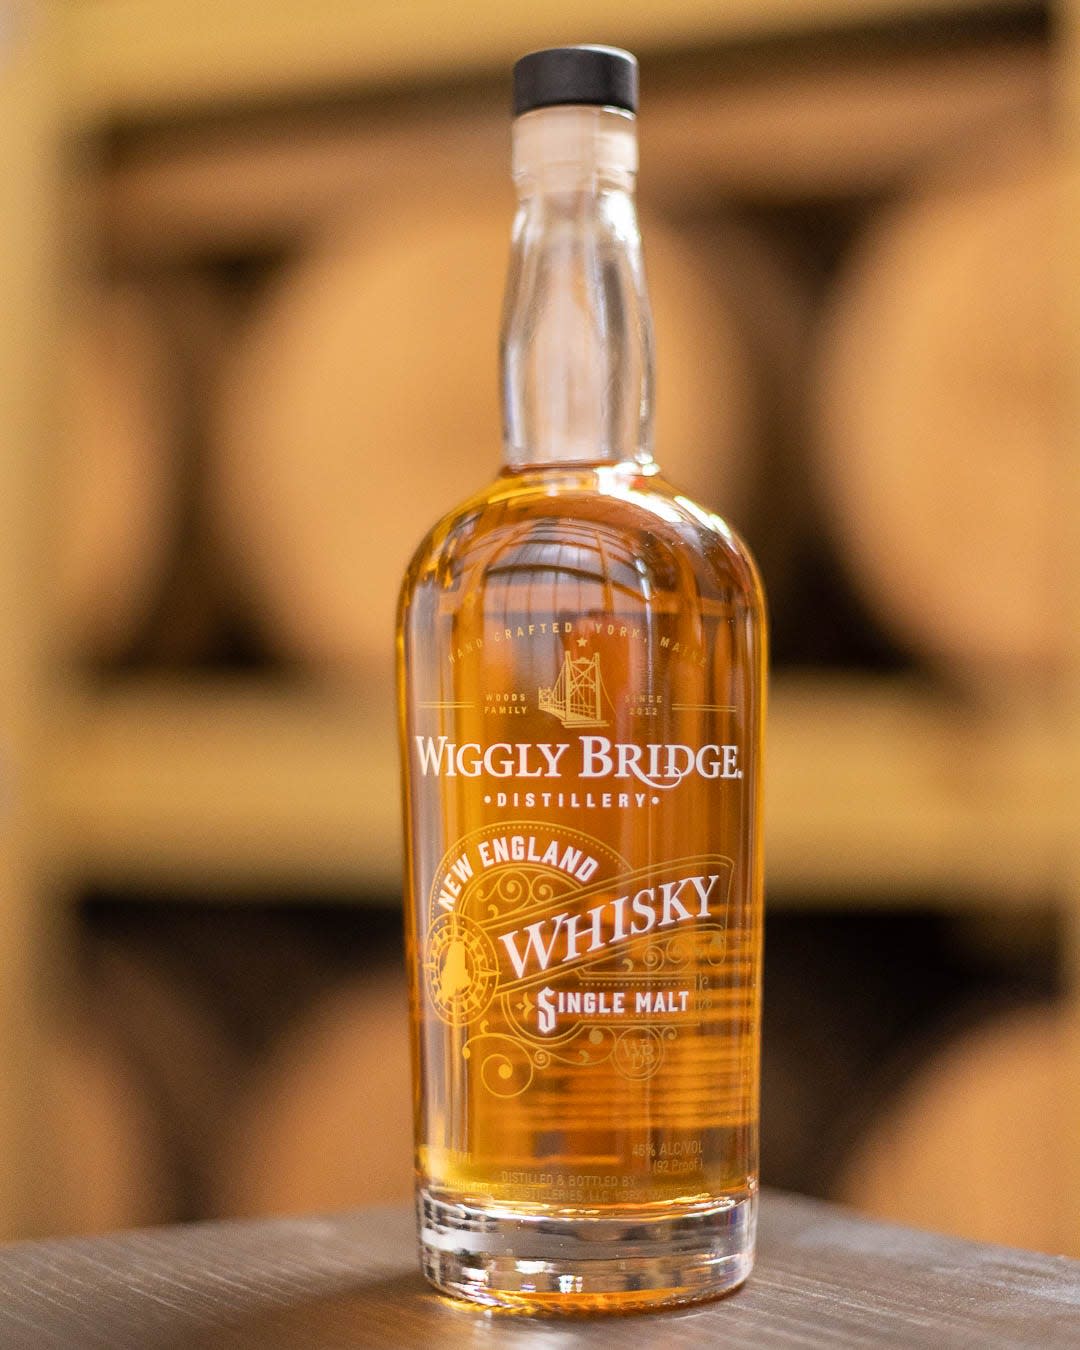 New England Single Malt is crafted from 100% Maine-grown malted barley.